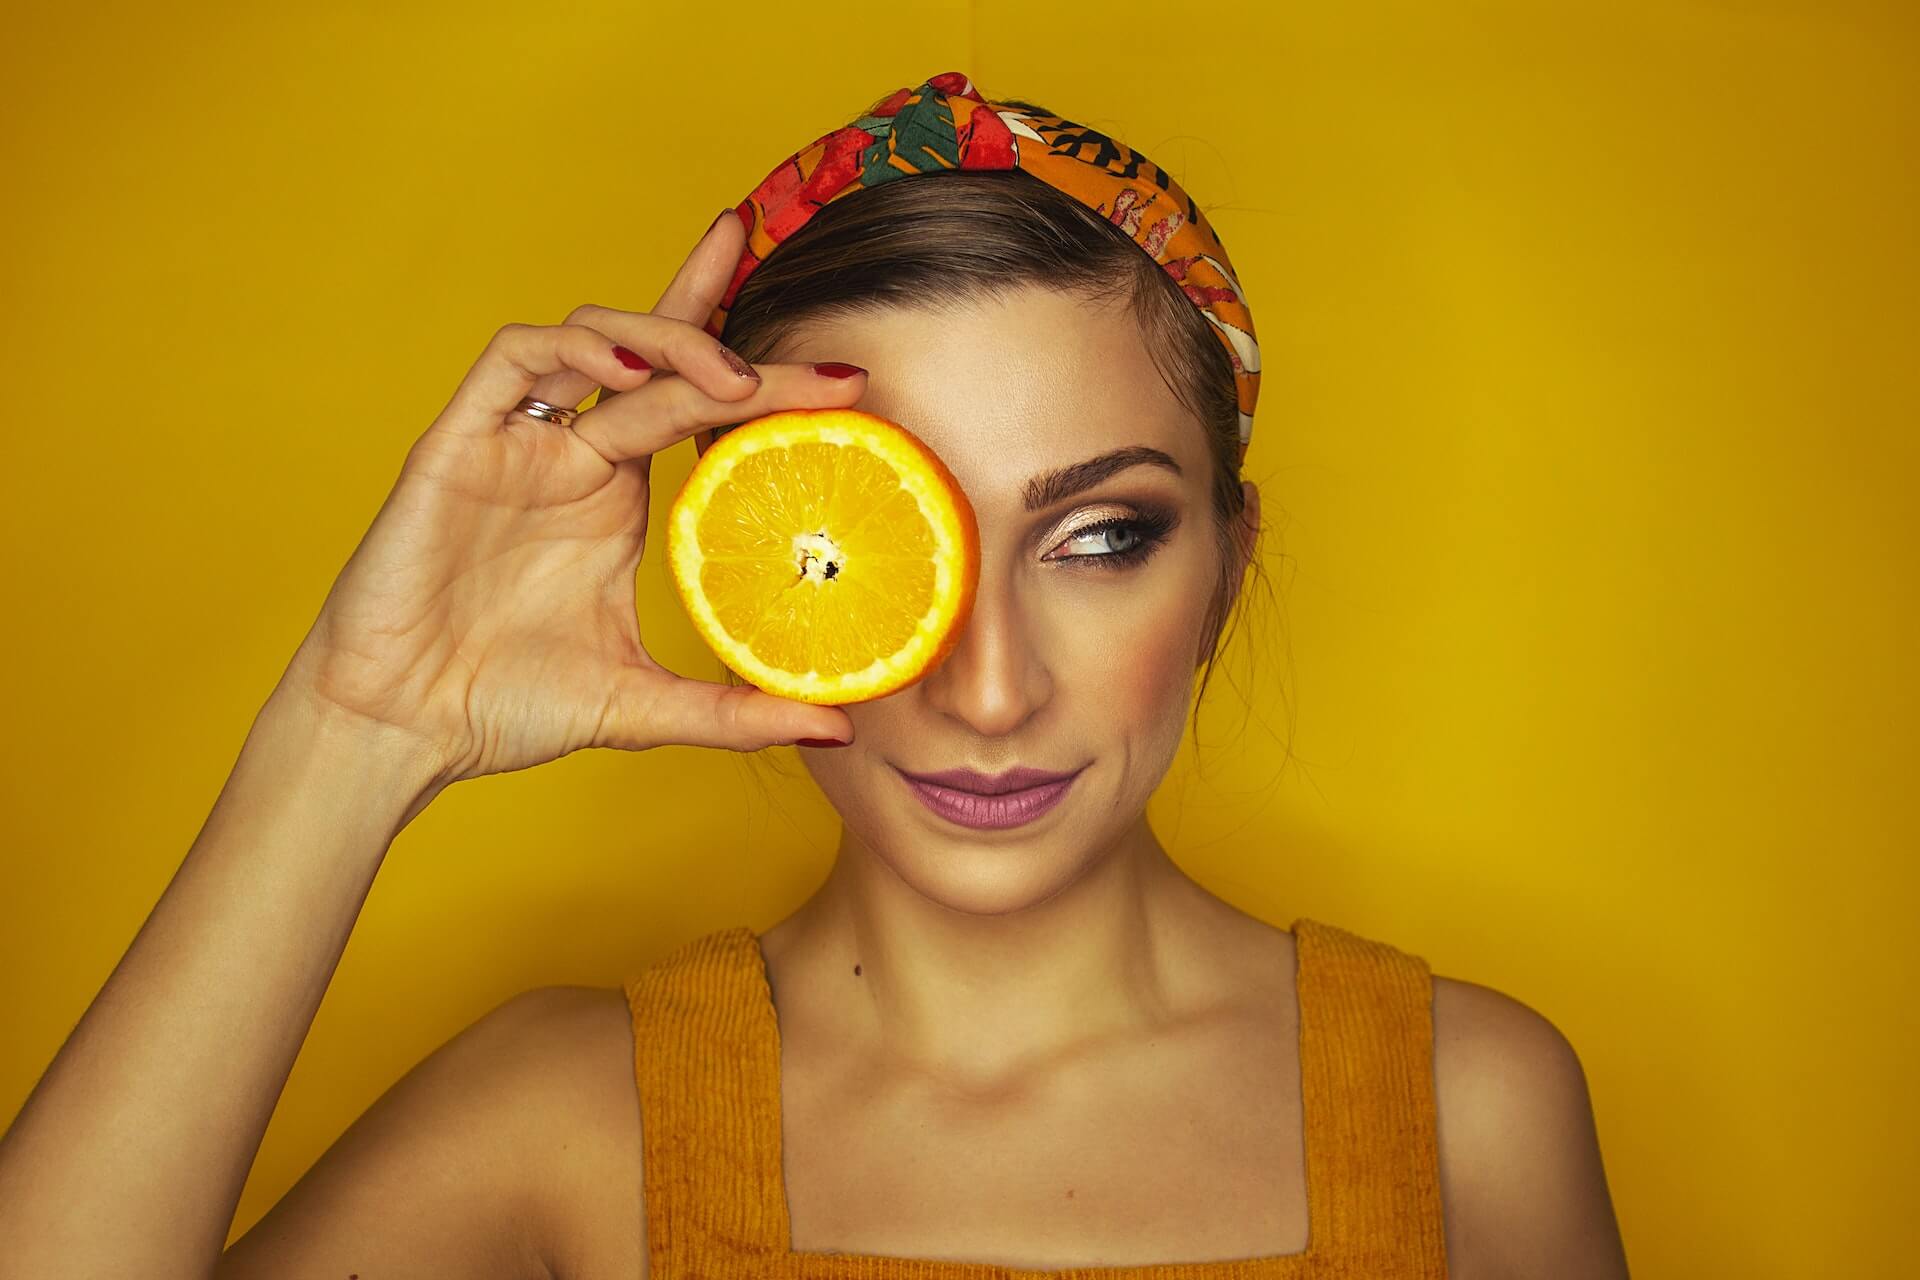 Vitamin C is important for skincare - orange over ladies skin and eye